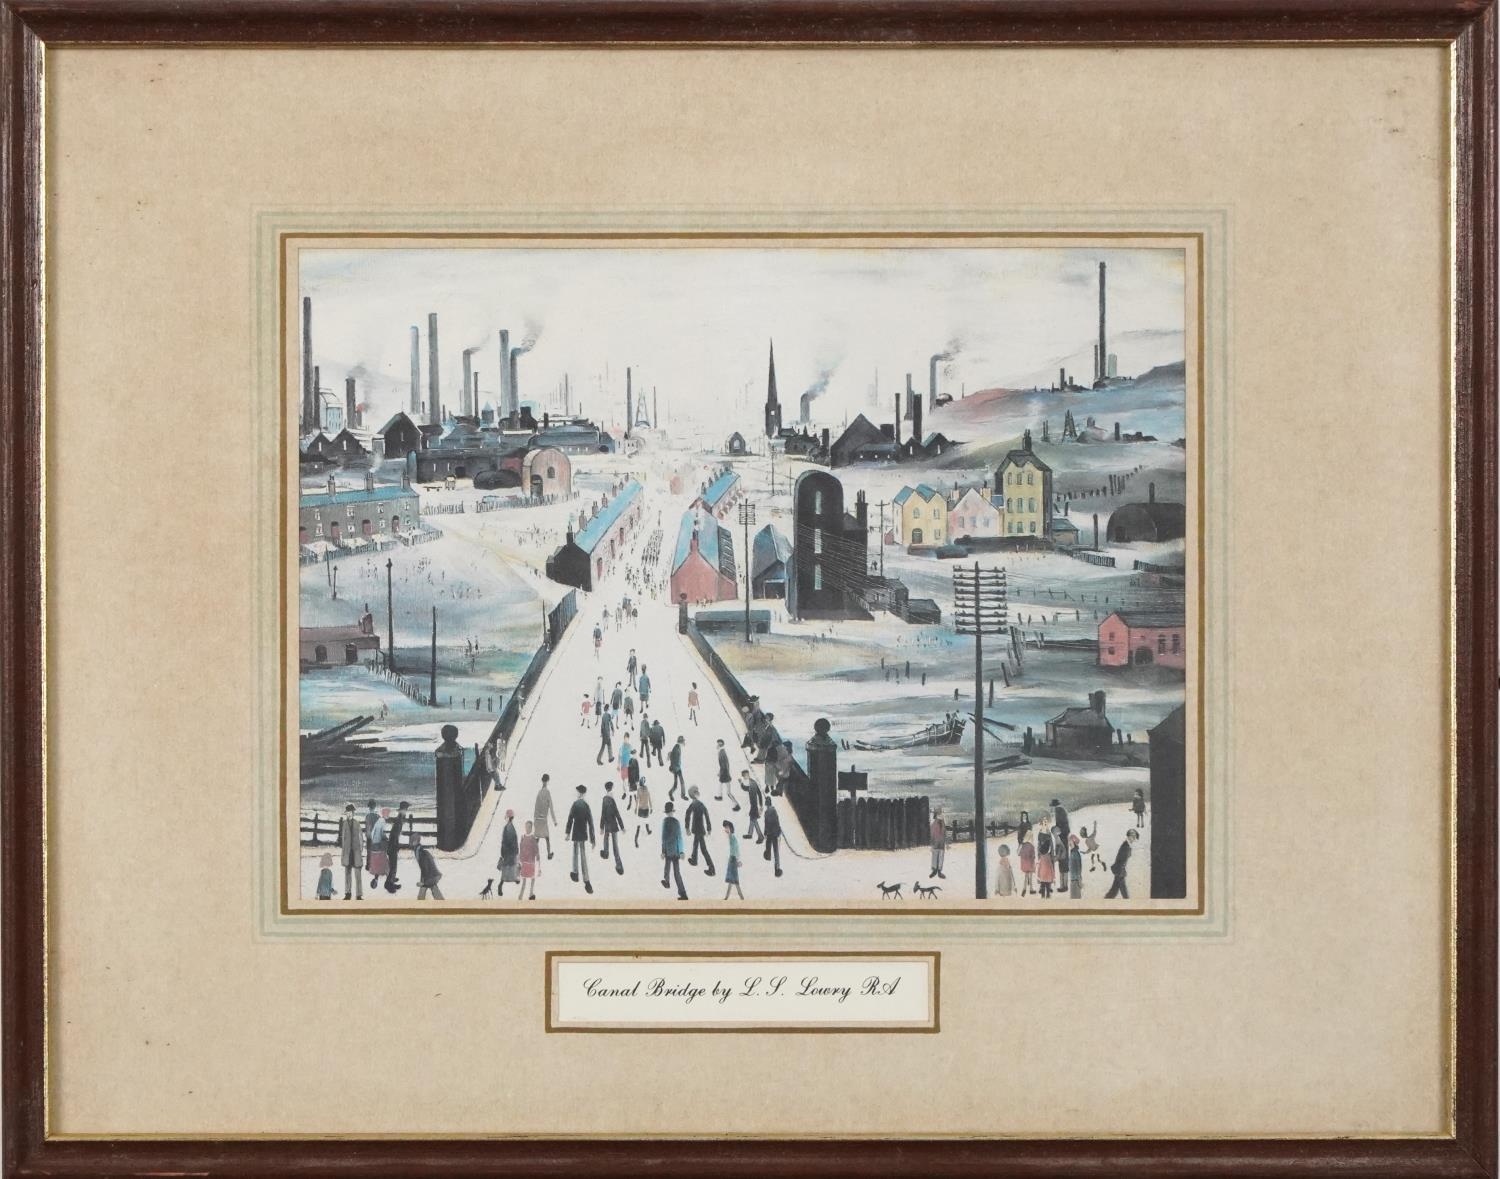 After Laurence Stephen Lowry - Canal Bridge and Laying a Foundation, two vintage prints in colour, - Image 3 of 11